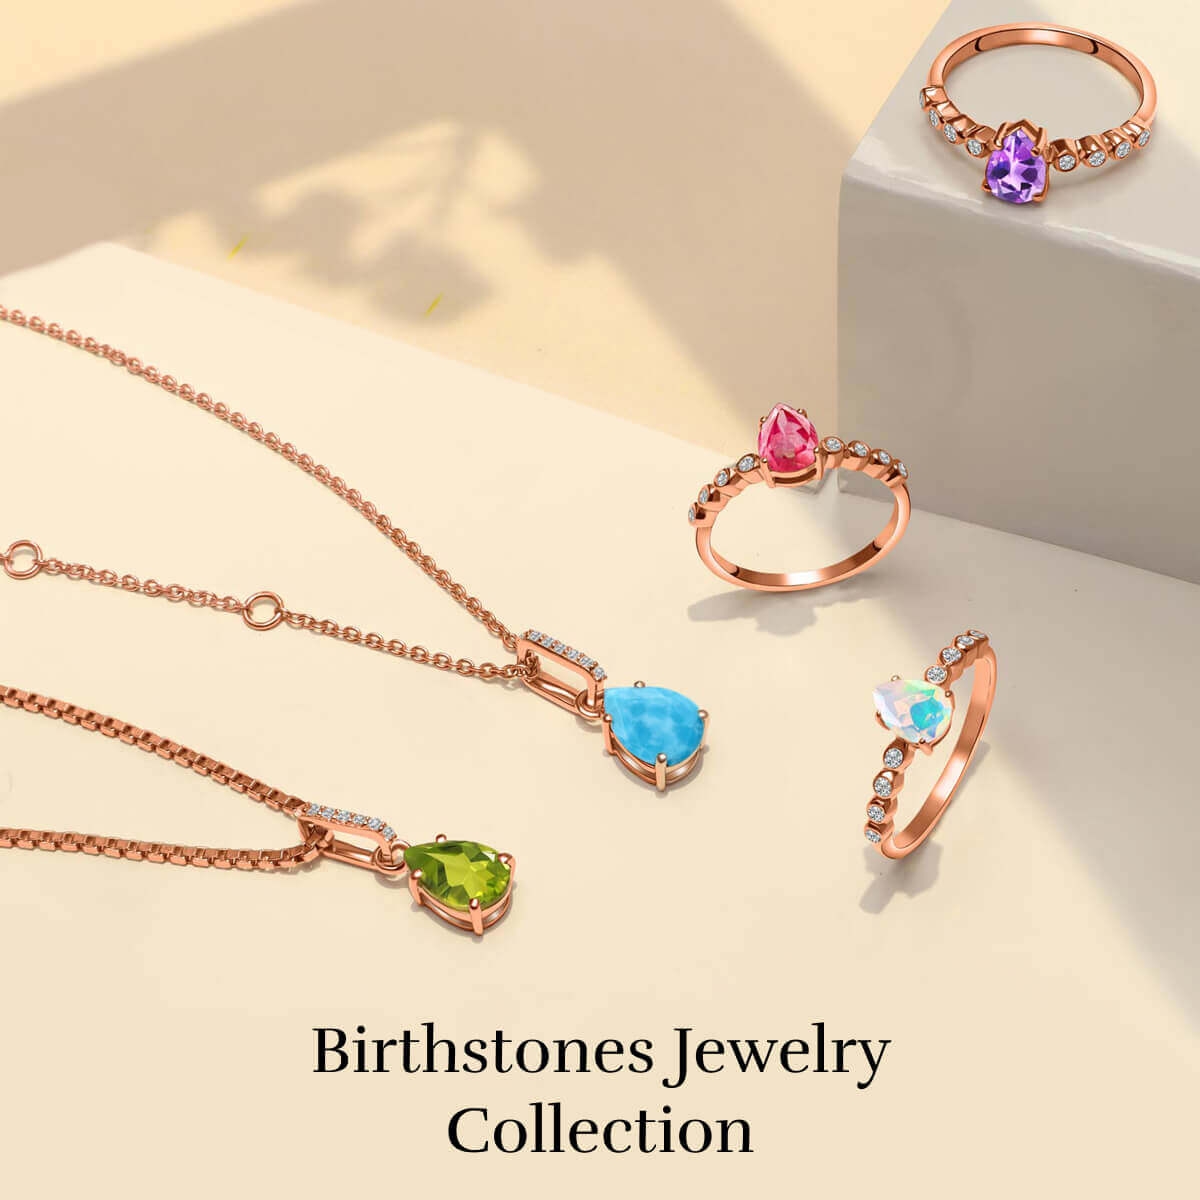 Birthstones Jewelry: Traditional Gifts of Jewelry